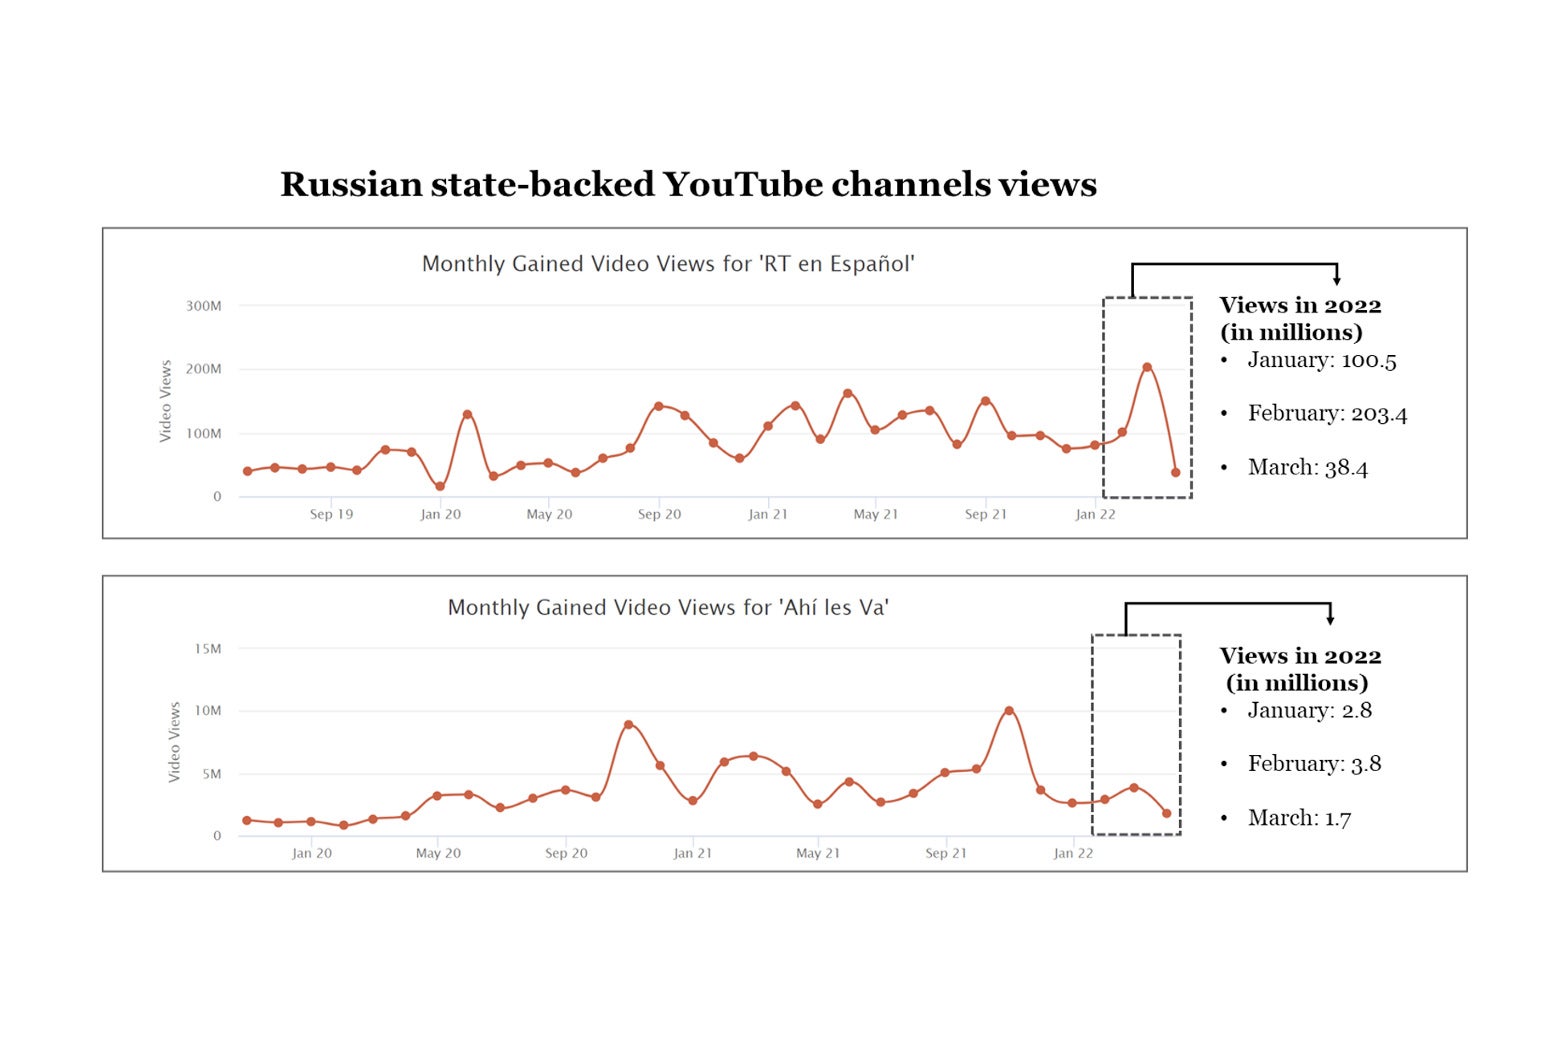 Two line graphs showing views for Russian state-backed channels RT en Español  and Ahí les Va. Viewership showed a significant jump in January and February 2022, before declining in March.